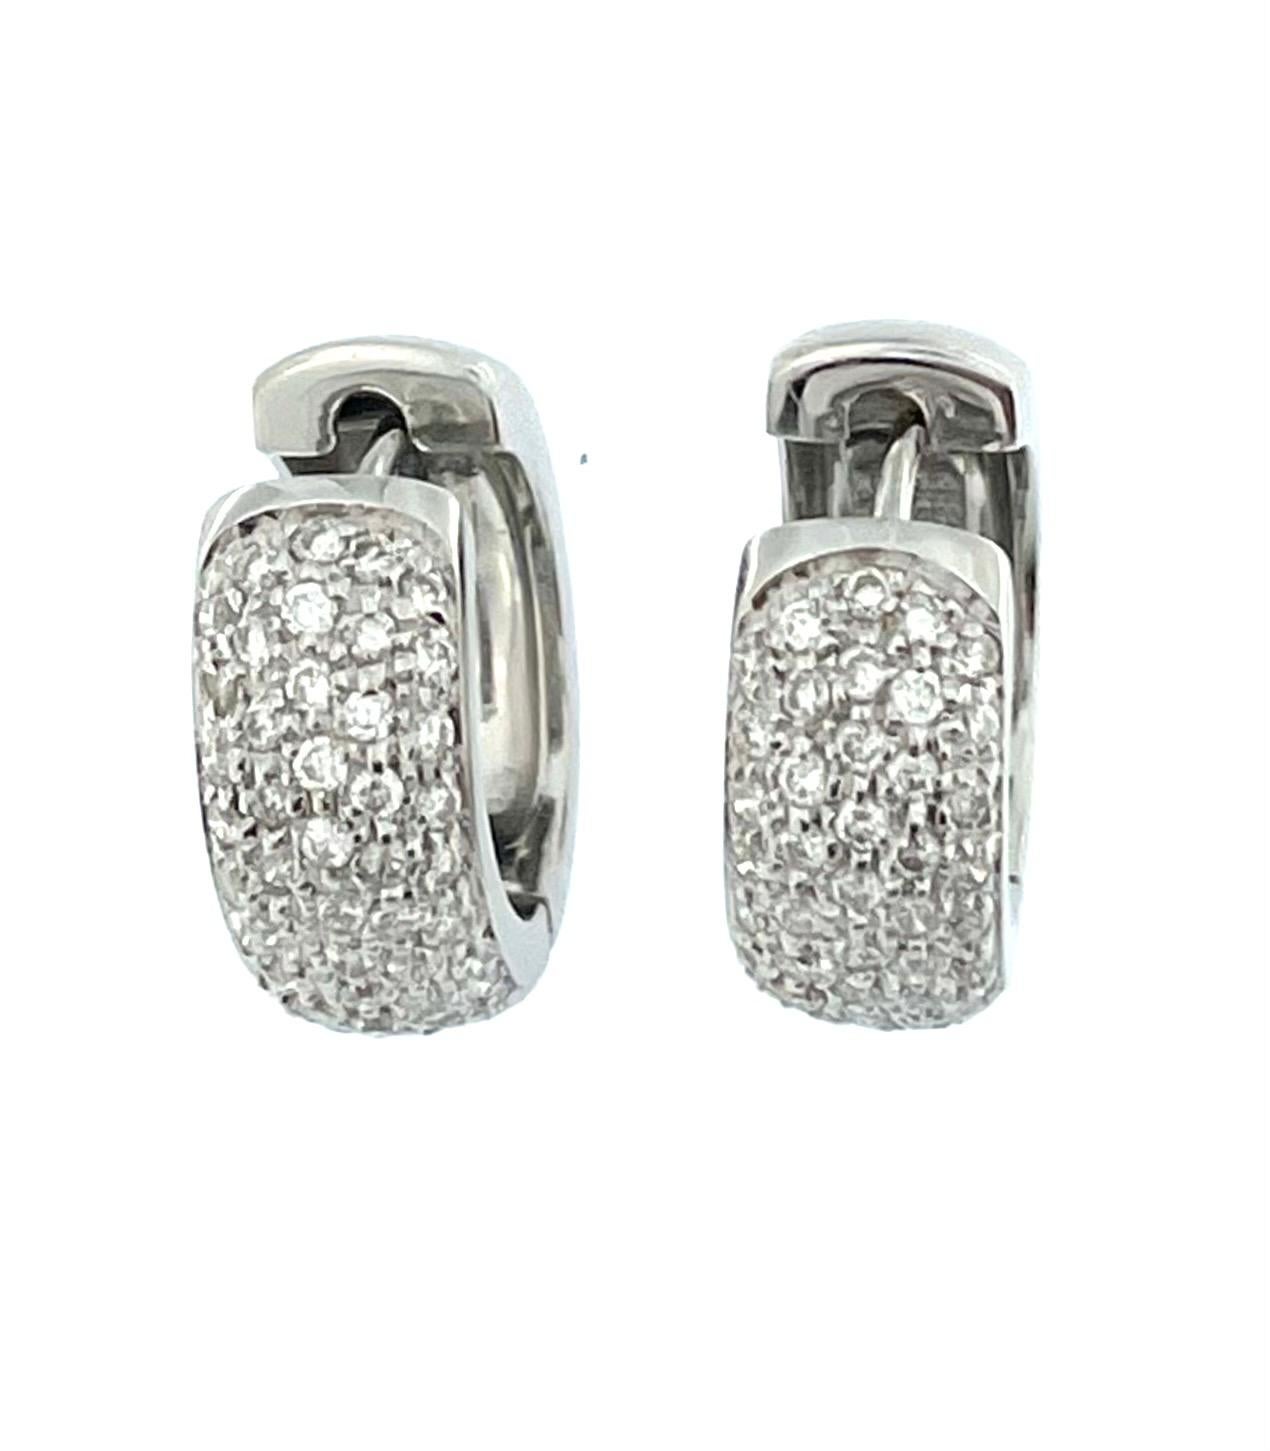 The French 18 karat White Gold Hoop Earrings with Diamonds are a classic, refined and elegant accessory. 

Crafted from 18 karat white gold, these earrings showcase a high level of purity and a luxurious, silvery-white appearance. White gold is